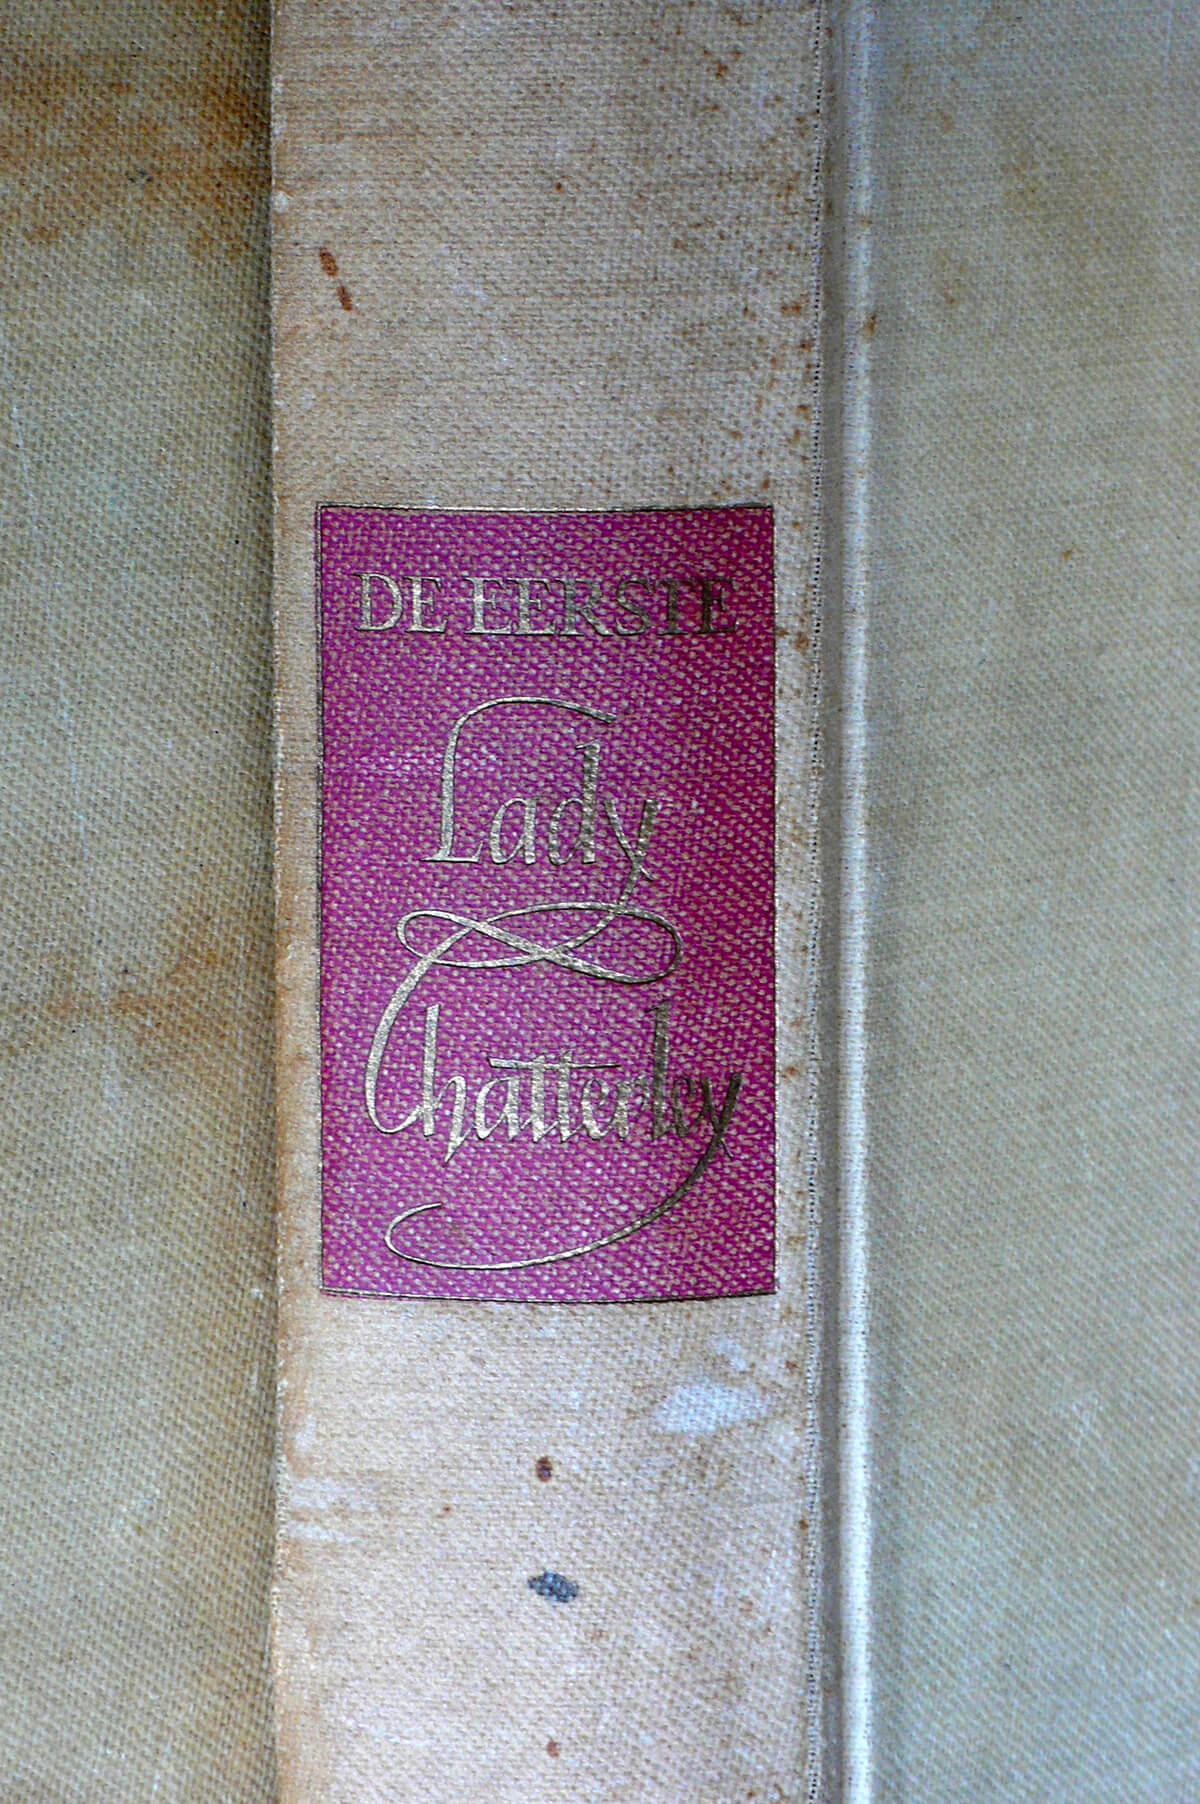 Lady Chatterley, cover, 22.5 x 15,5 x 3 cm, 2017